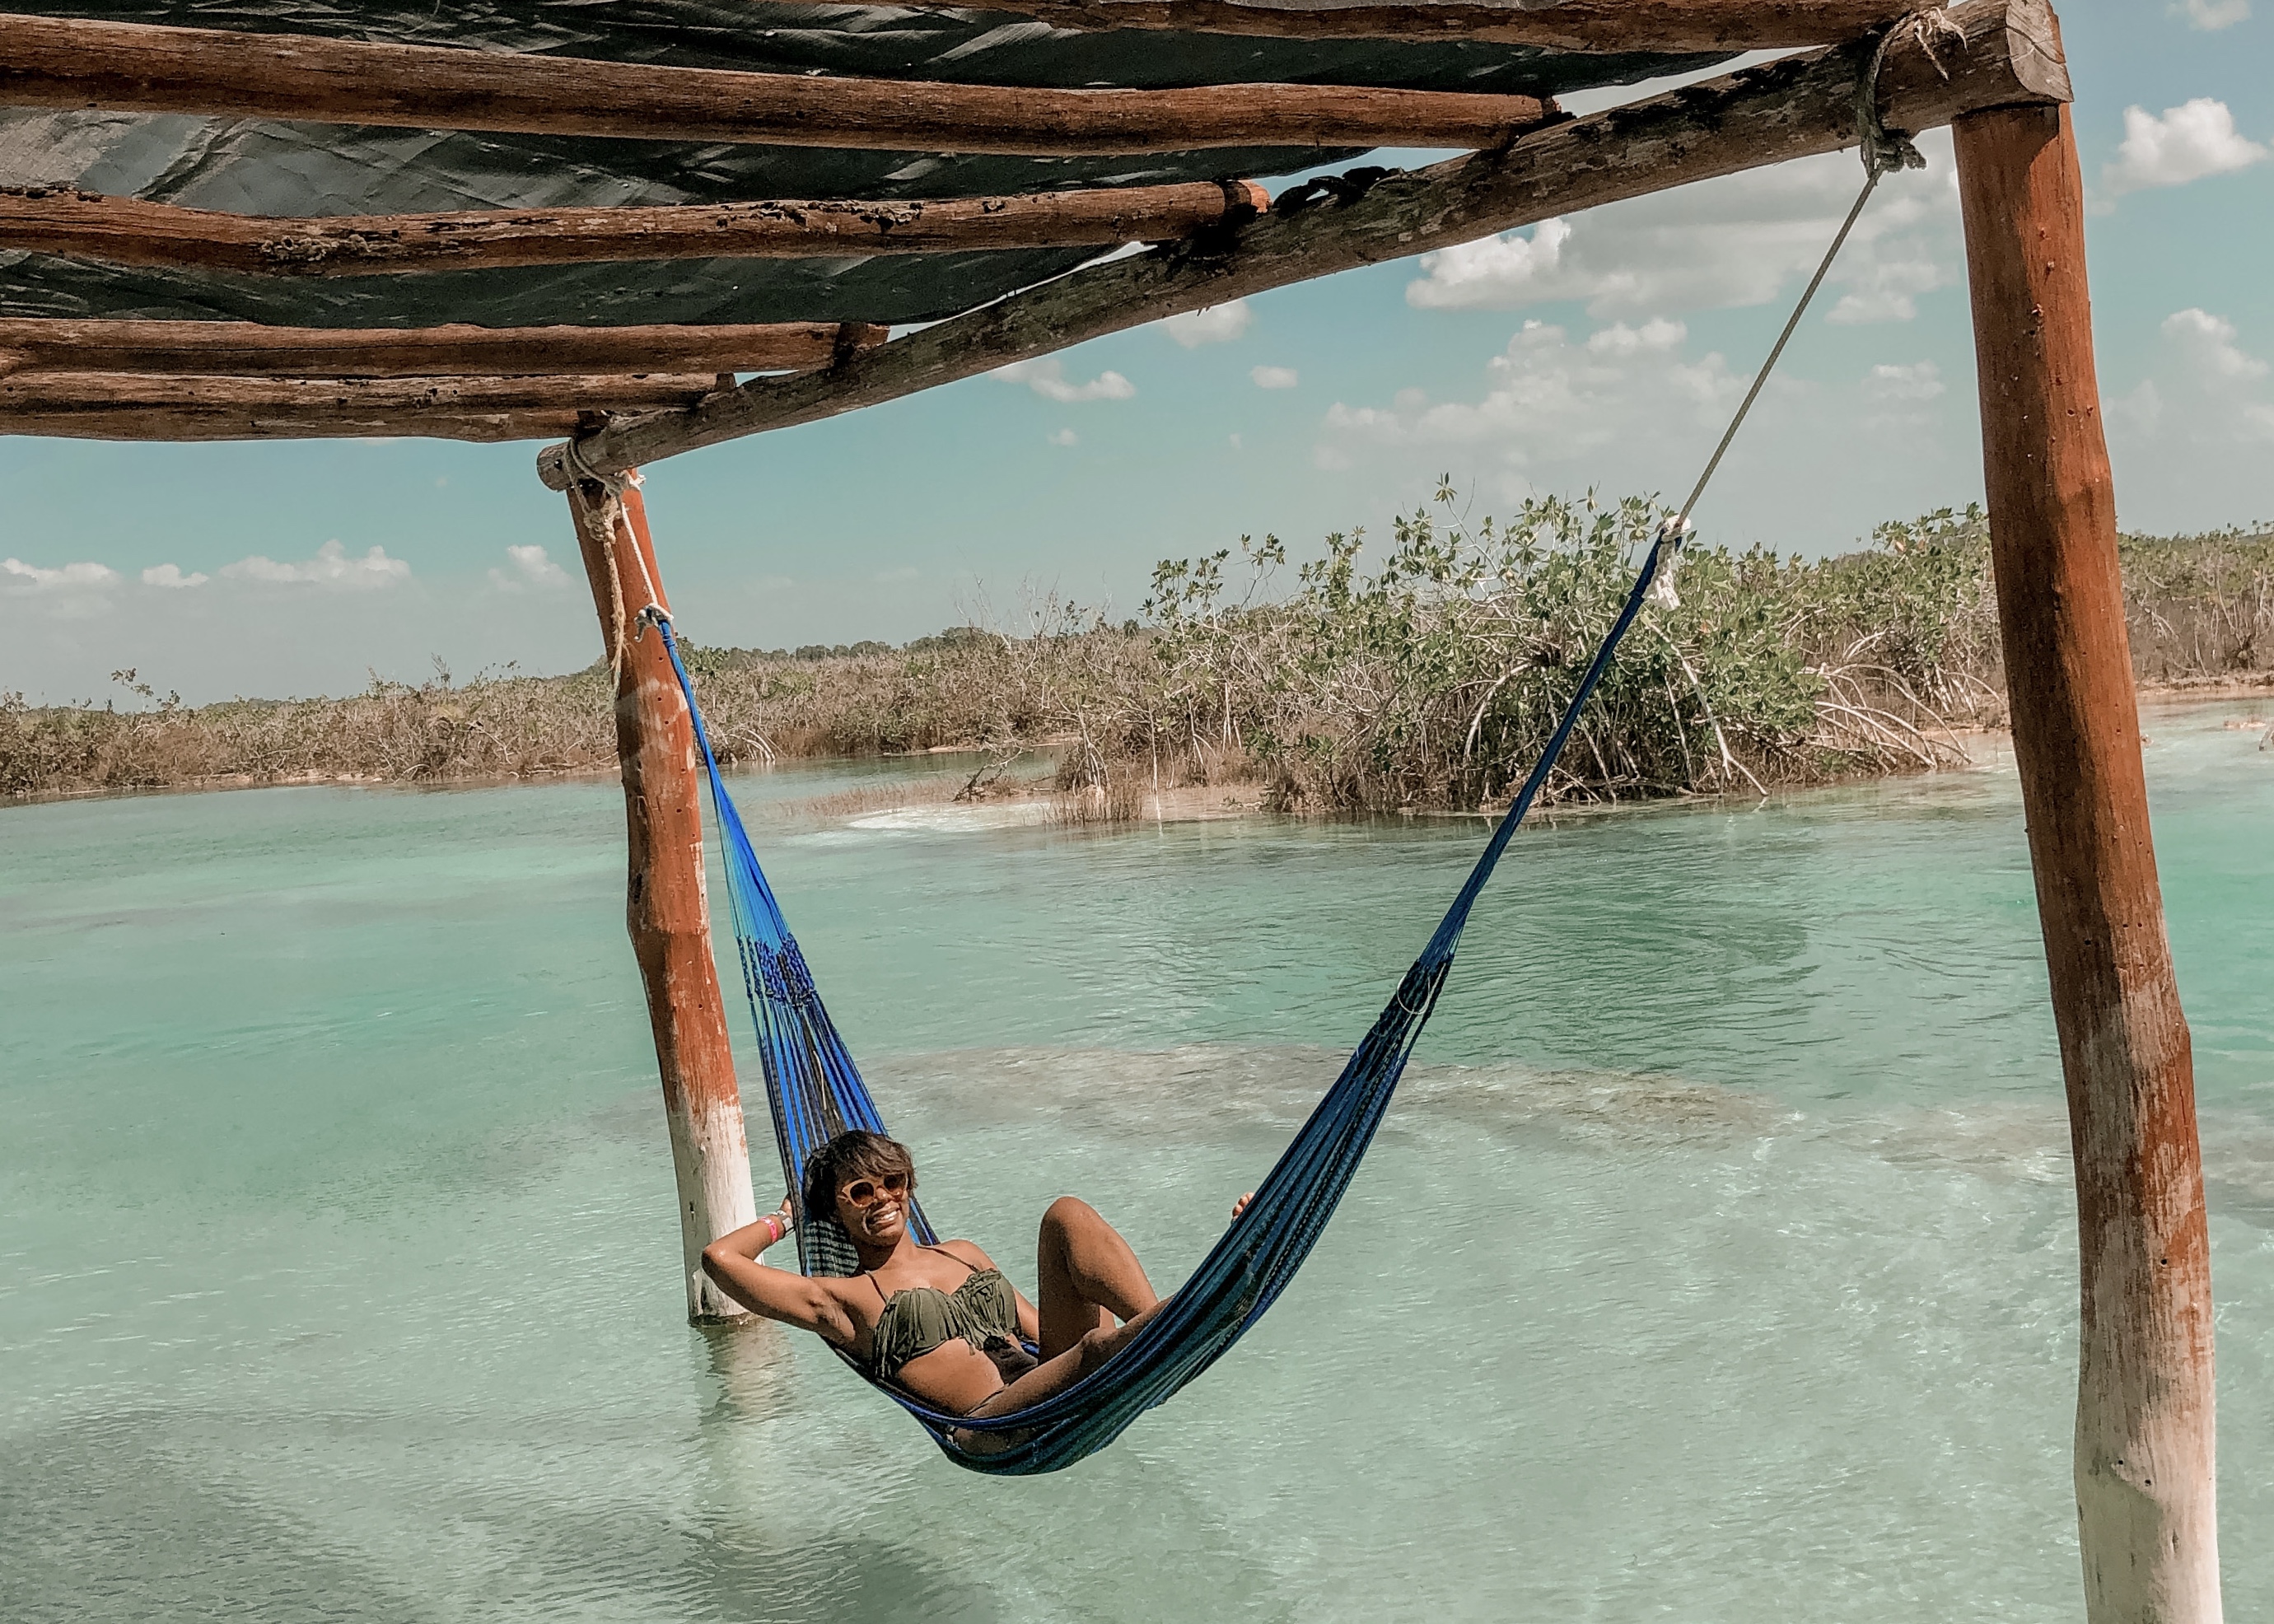 Is 'Better Late Than Never' Best? Moving Abroad After 30: Black woman in a hammock in Bacalar, Mexico